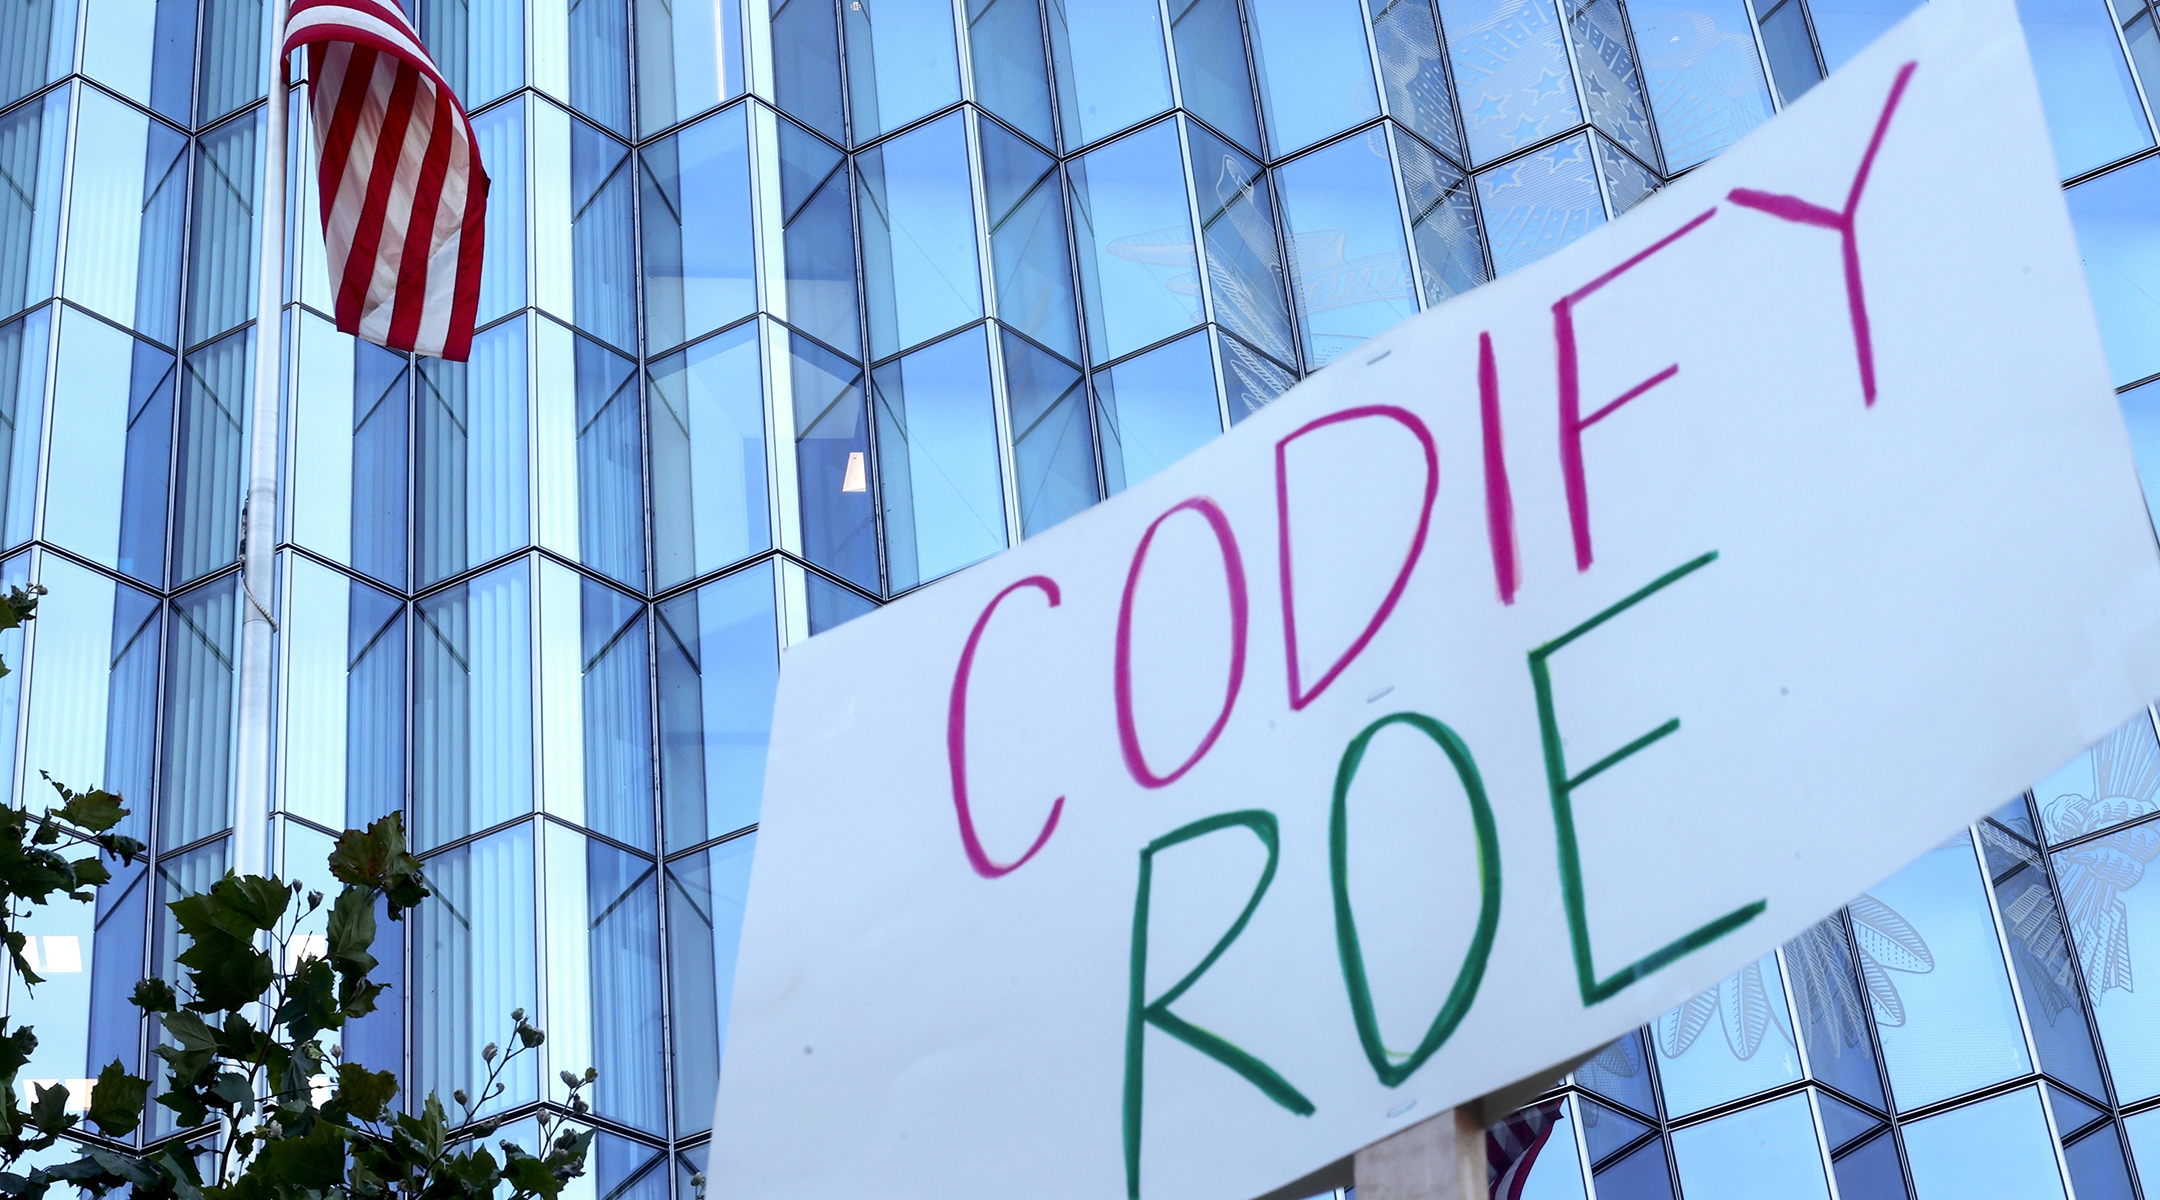 A sign reads "Codify Roe."